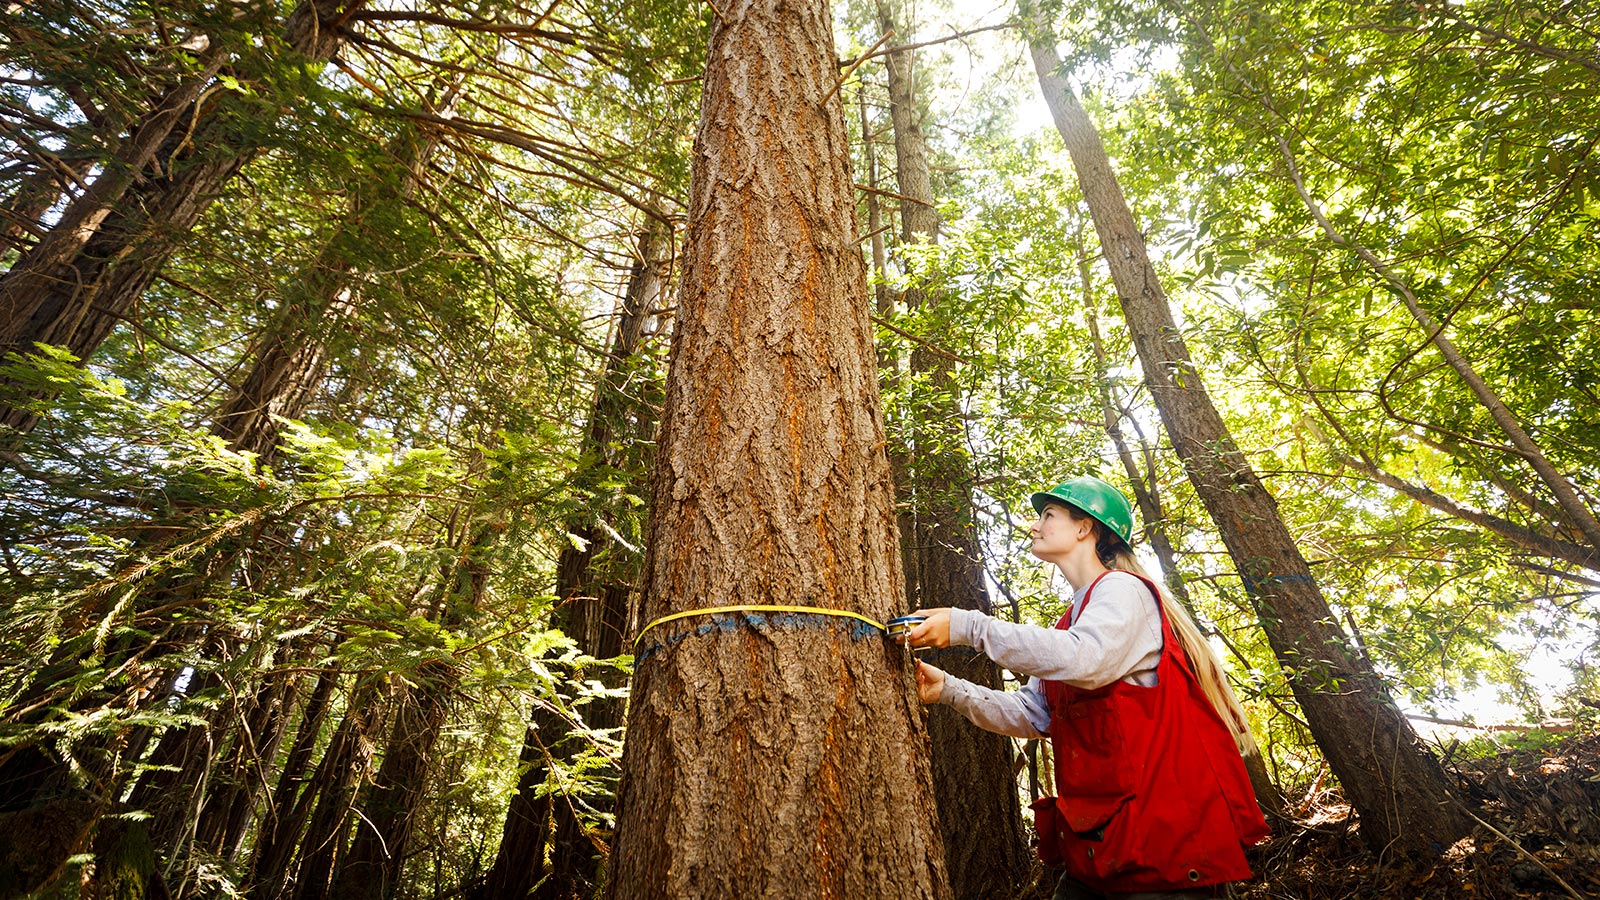 Student at Swanton Pacific Ranch measuring circumference of treed